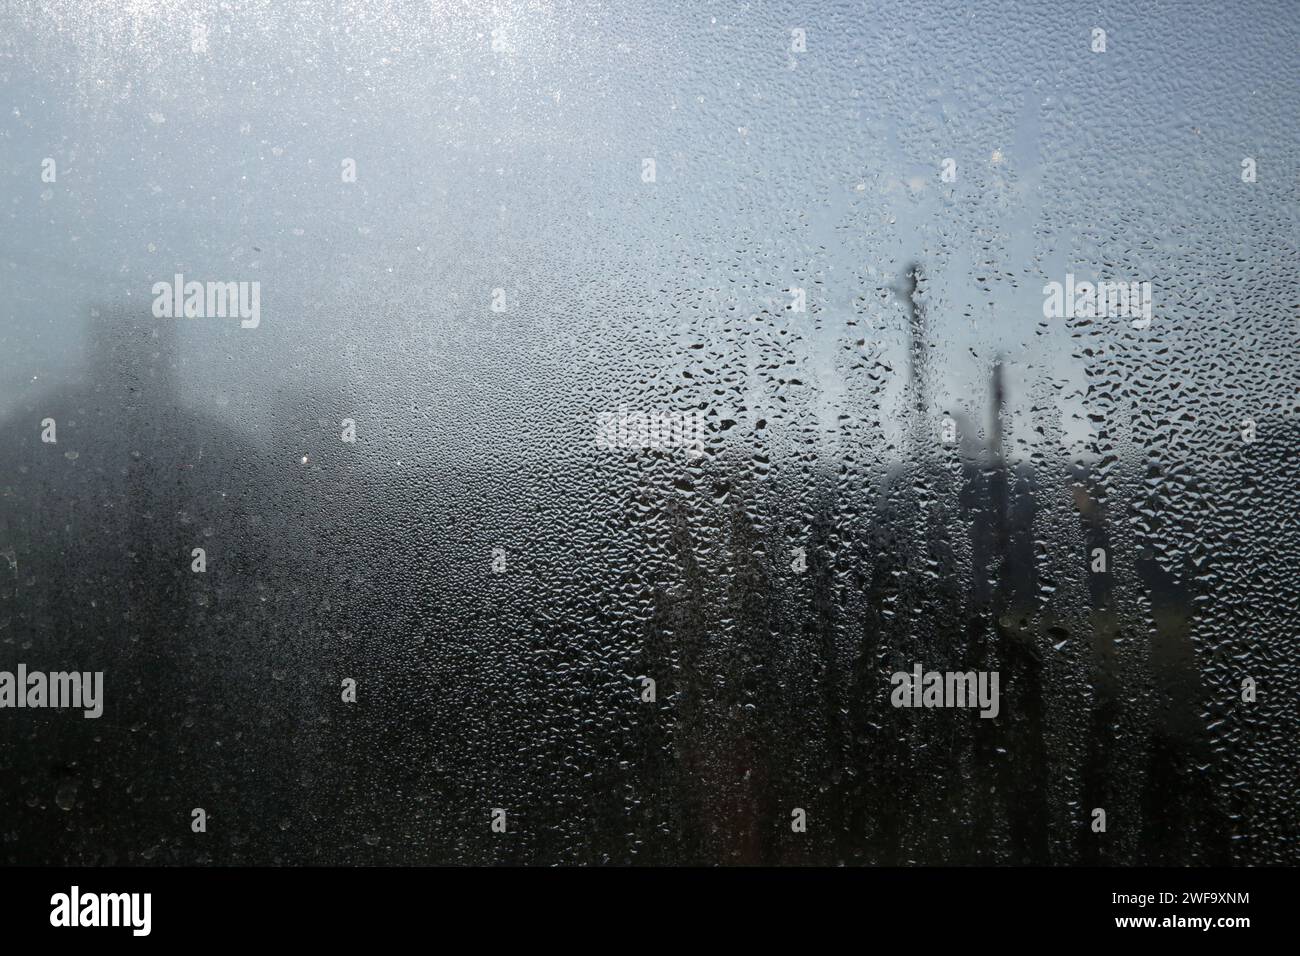 Closeup of heavy water condensation on window glass during a winter morning. Stock Photo